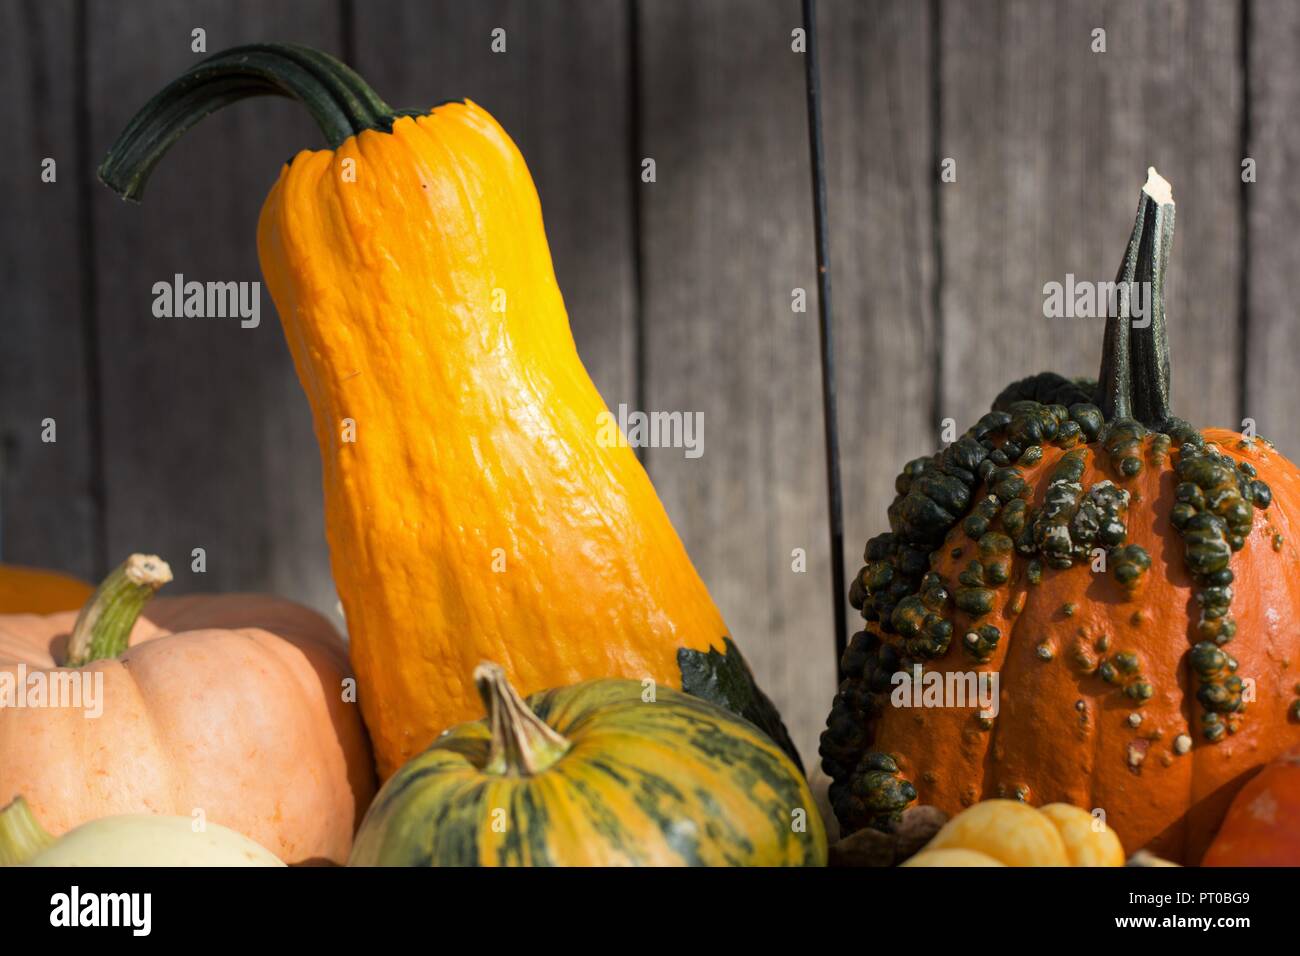 A close up of multiple varieties of squash and pumpkins. Stock Photo